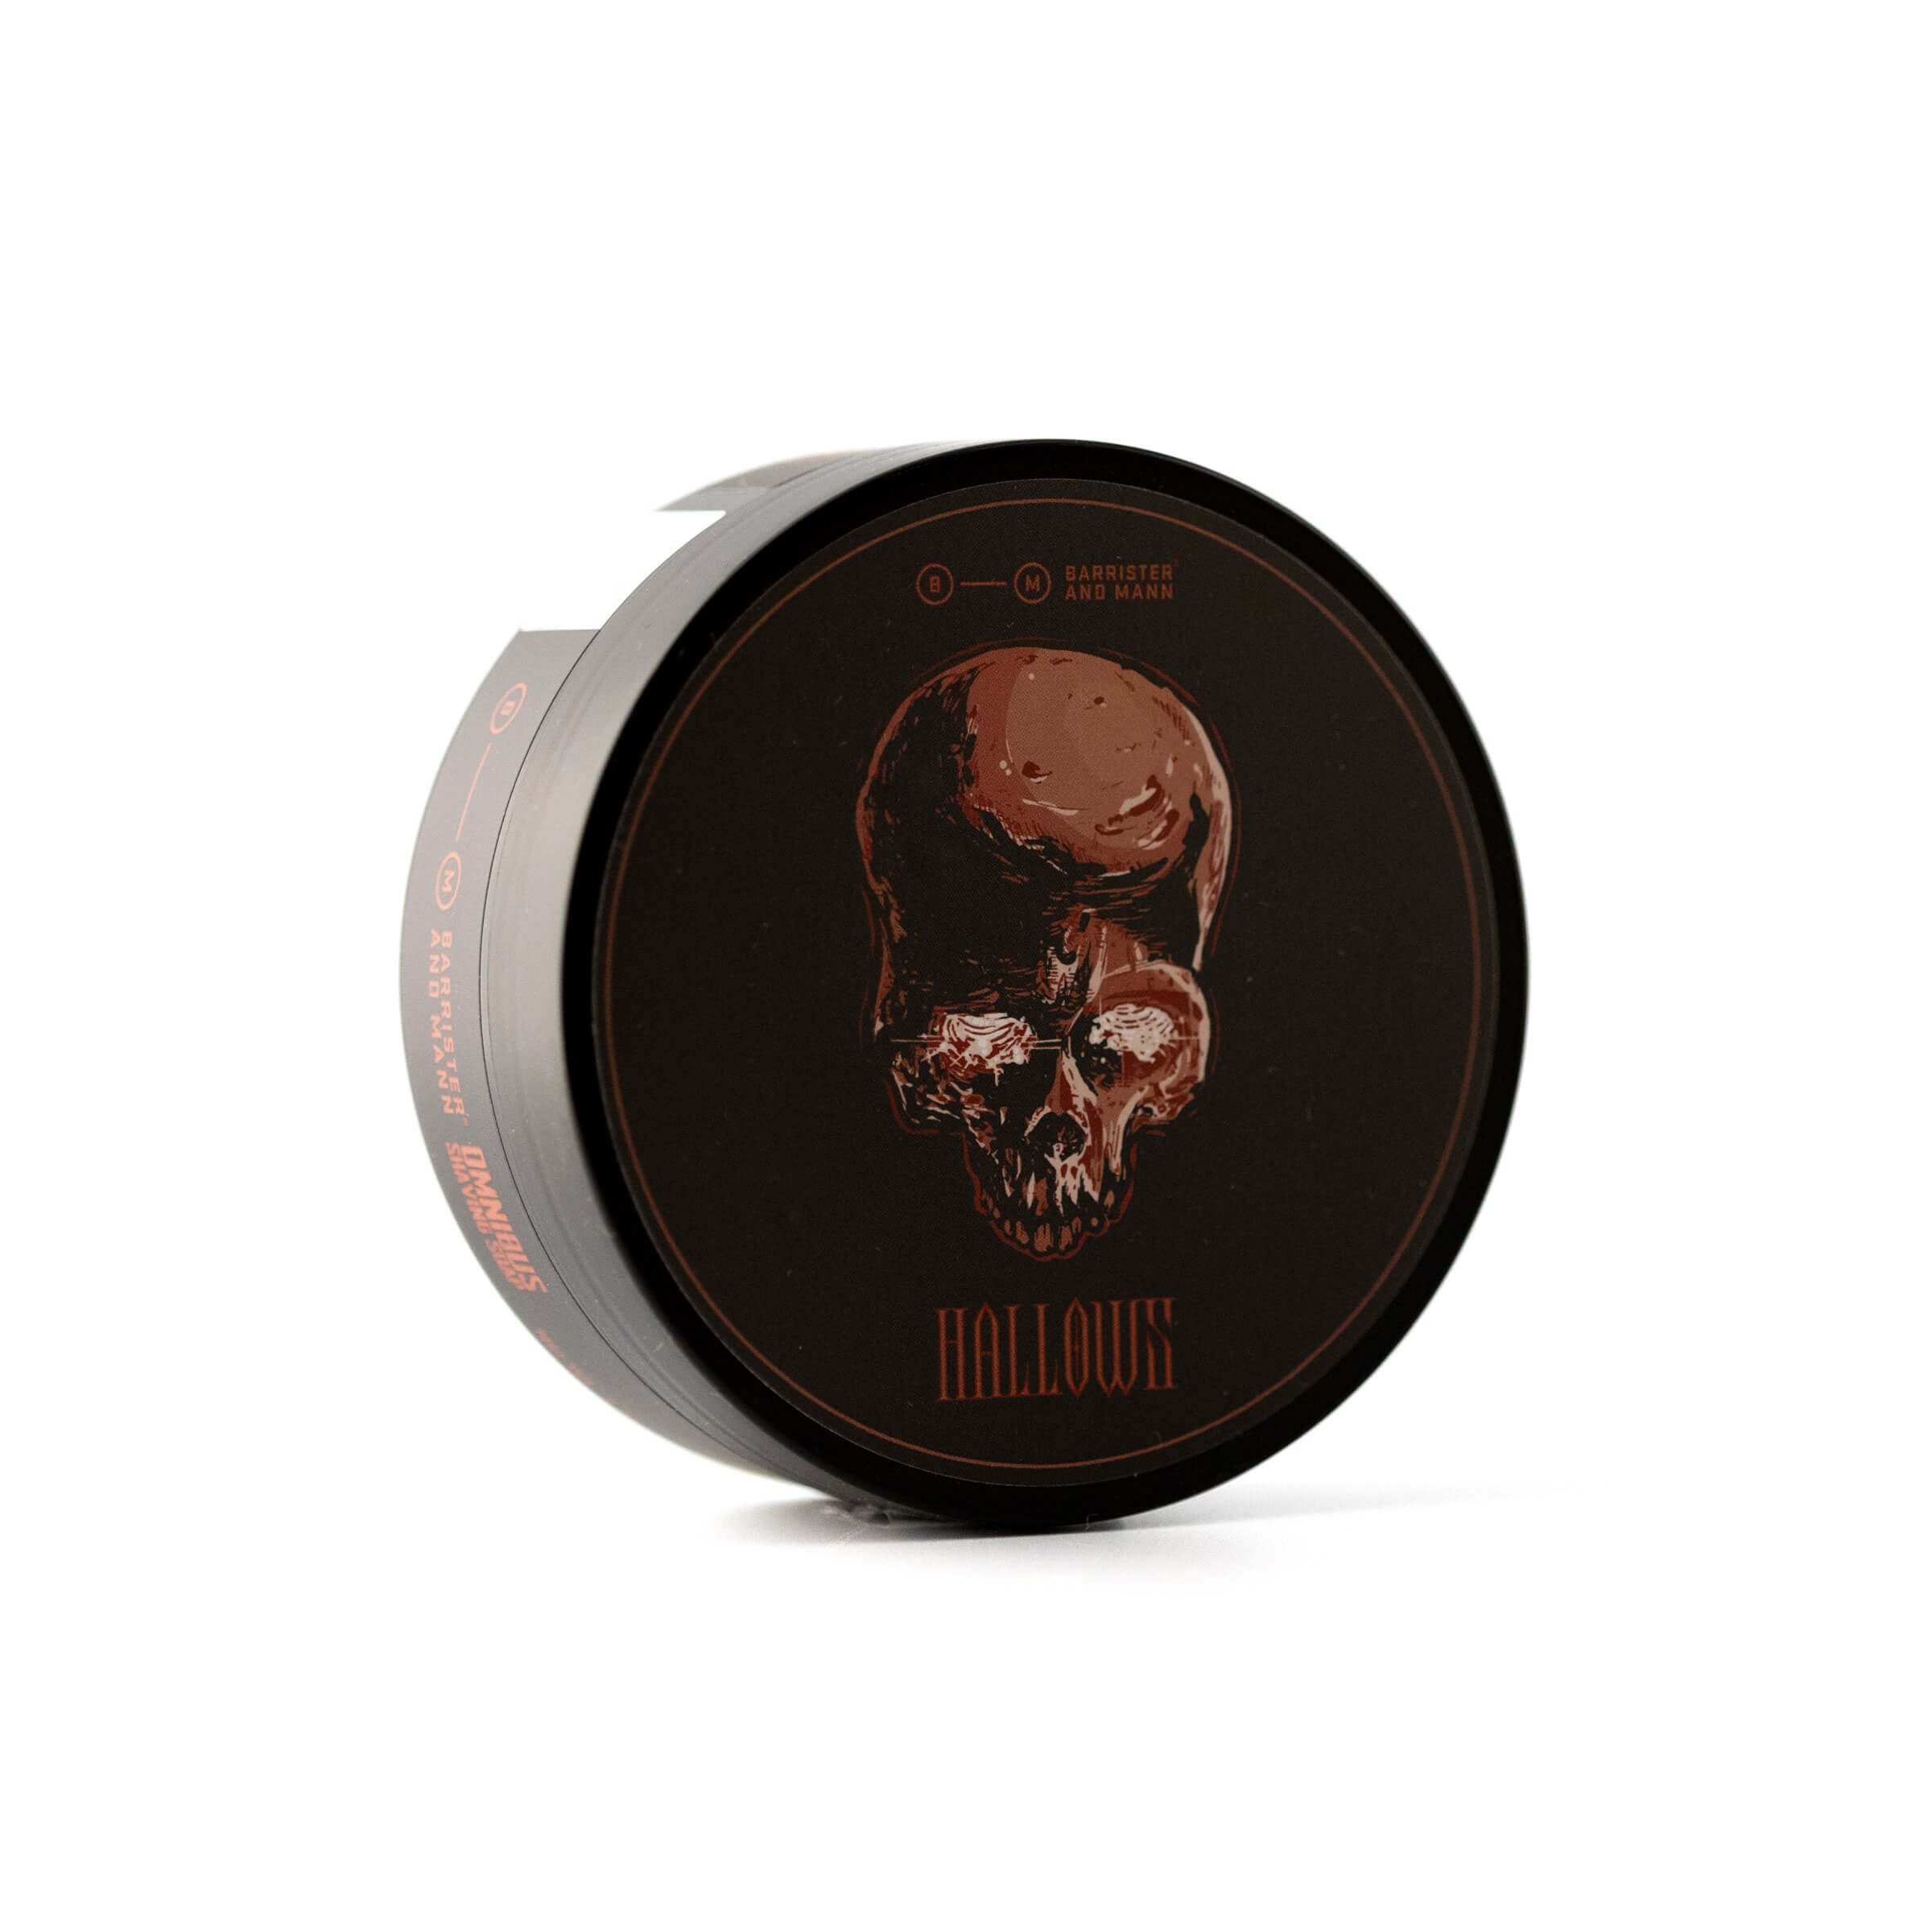 Barrister and Mann Hallows Shaving Soap